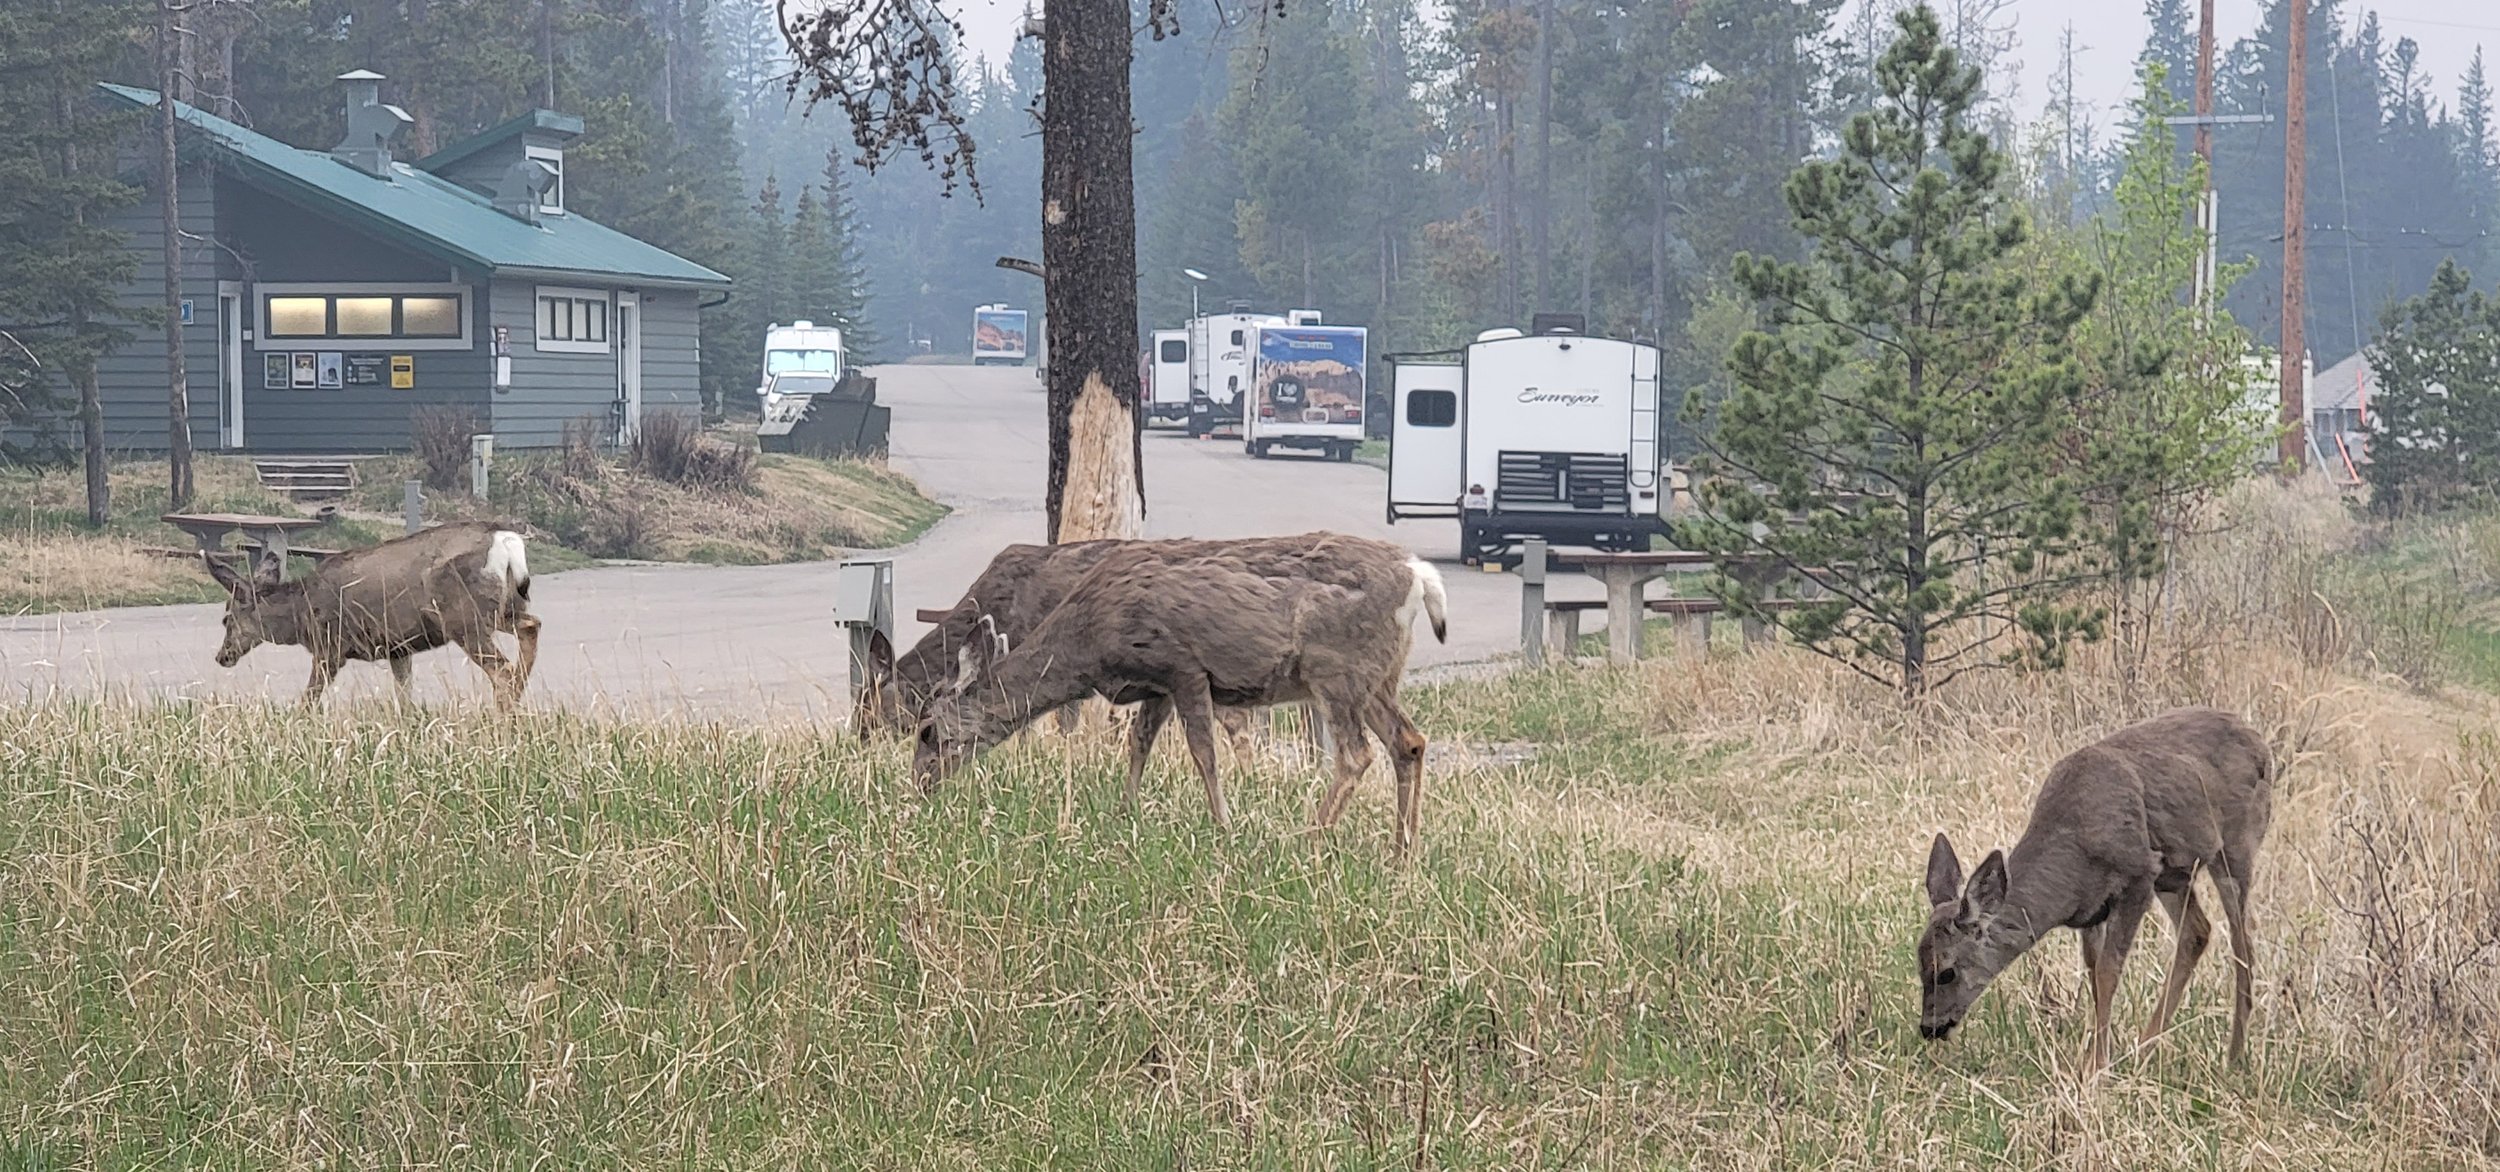 Tons of animals around the campgrounds, so that's pretty cool.